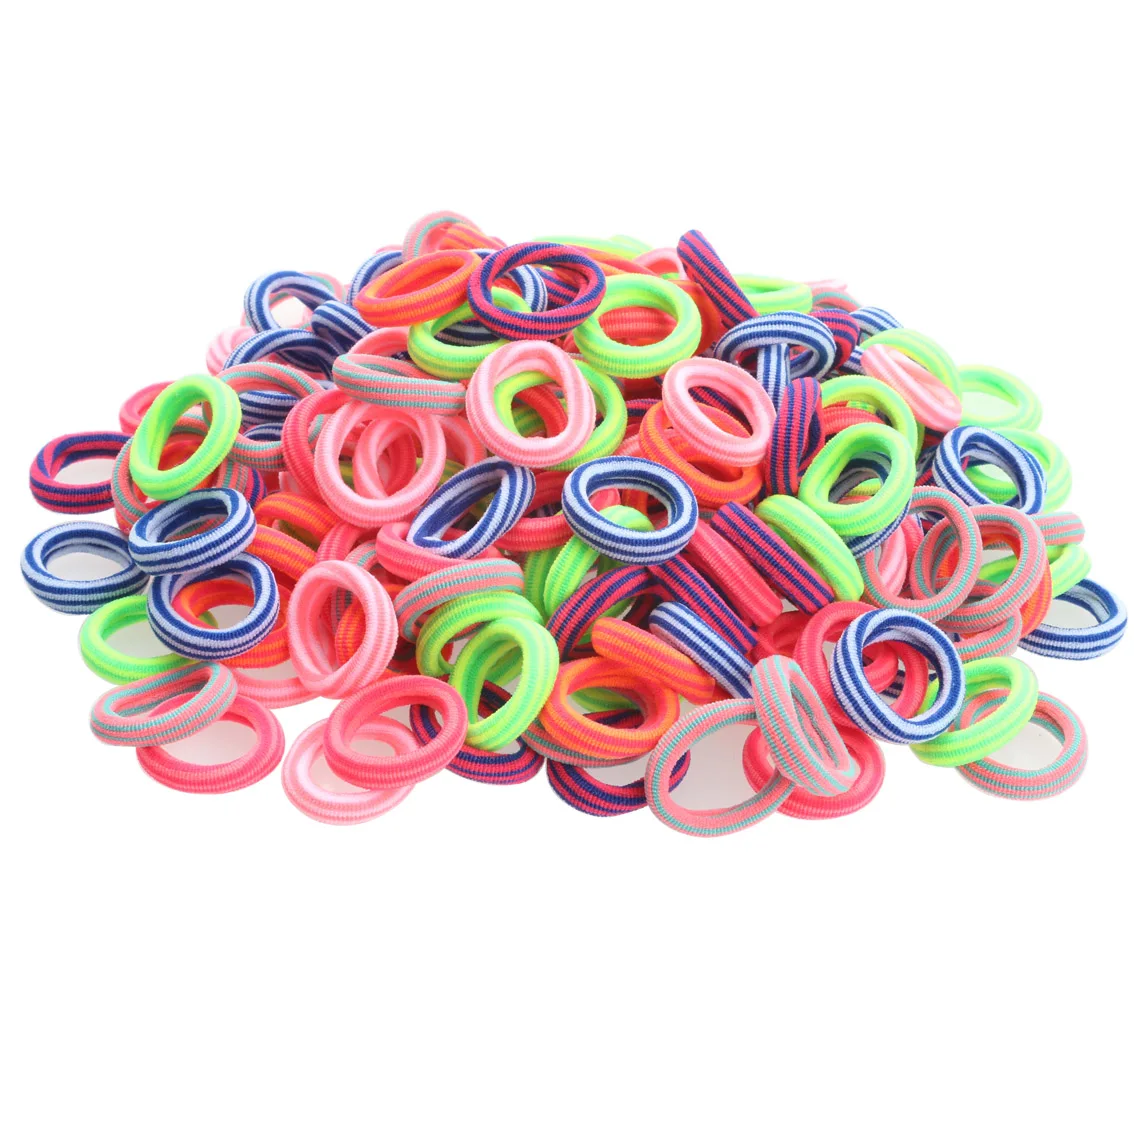 

50/100pc Girls Colorful Nylon Small Elastic Hair Bands Ties Children Ponytail Holder Rubber Bands Headband Kids Hair Accessories